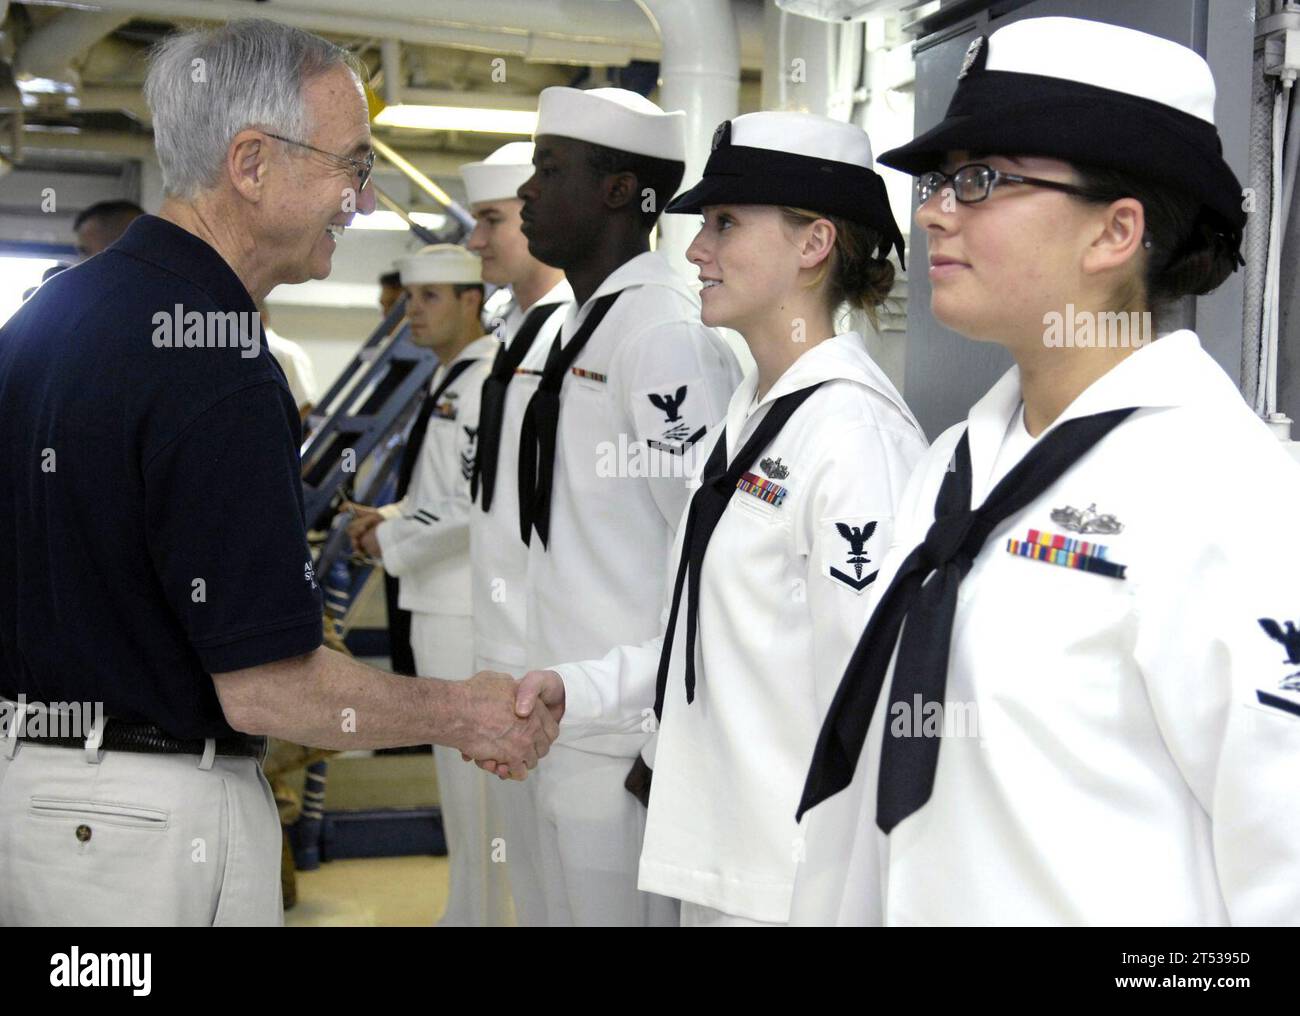 0707187203T-011 TYRRHENIAN SEA (July 18, 2007) - Deputy Secretary of Defense Gordon R. England meets with Sailors aboard Blue Ridge-class amphibious command ship USS Mount Whitney (LCC 20), off the coast of Naples, Italy. England is in Italy to meet with regional commanders and to thank Sailors for their service and sacrifice. U.S. Department of Defense Stock Photo